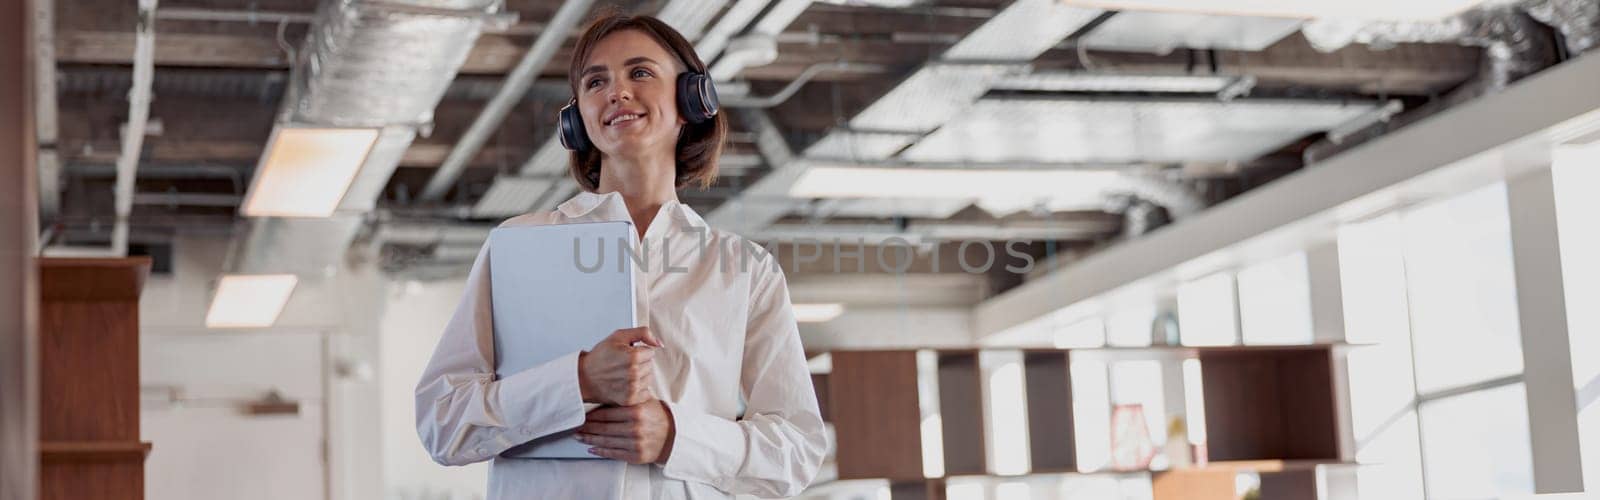 Attractive business woman in headphones with laptop standing in modern office by Yaroslav_astakhov